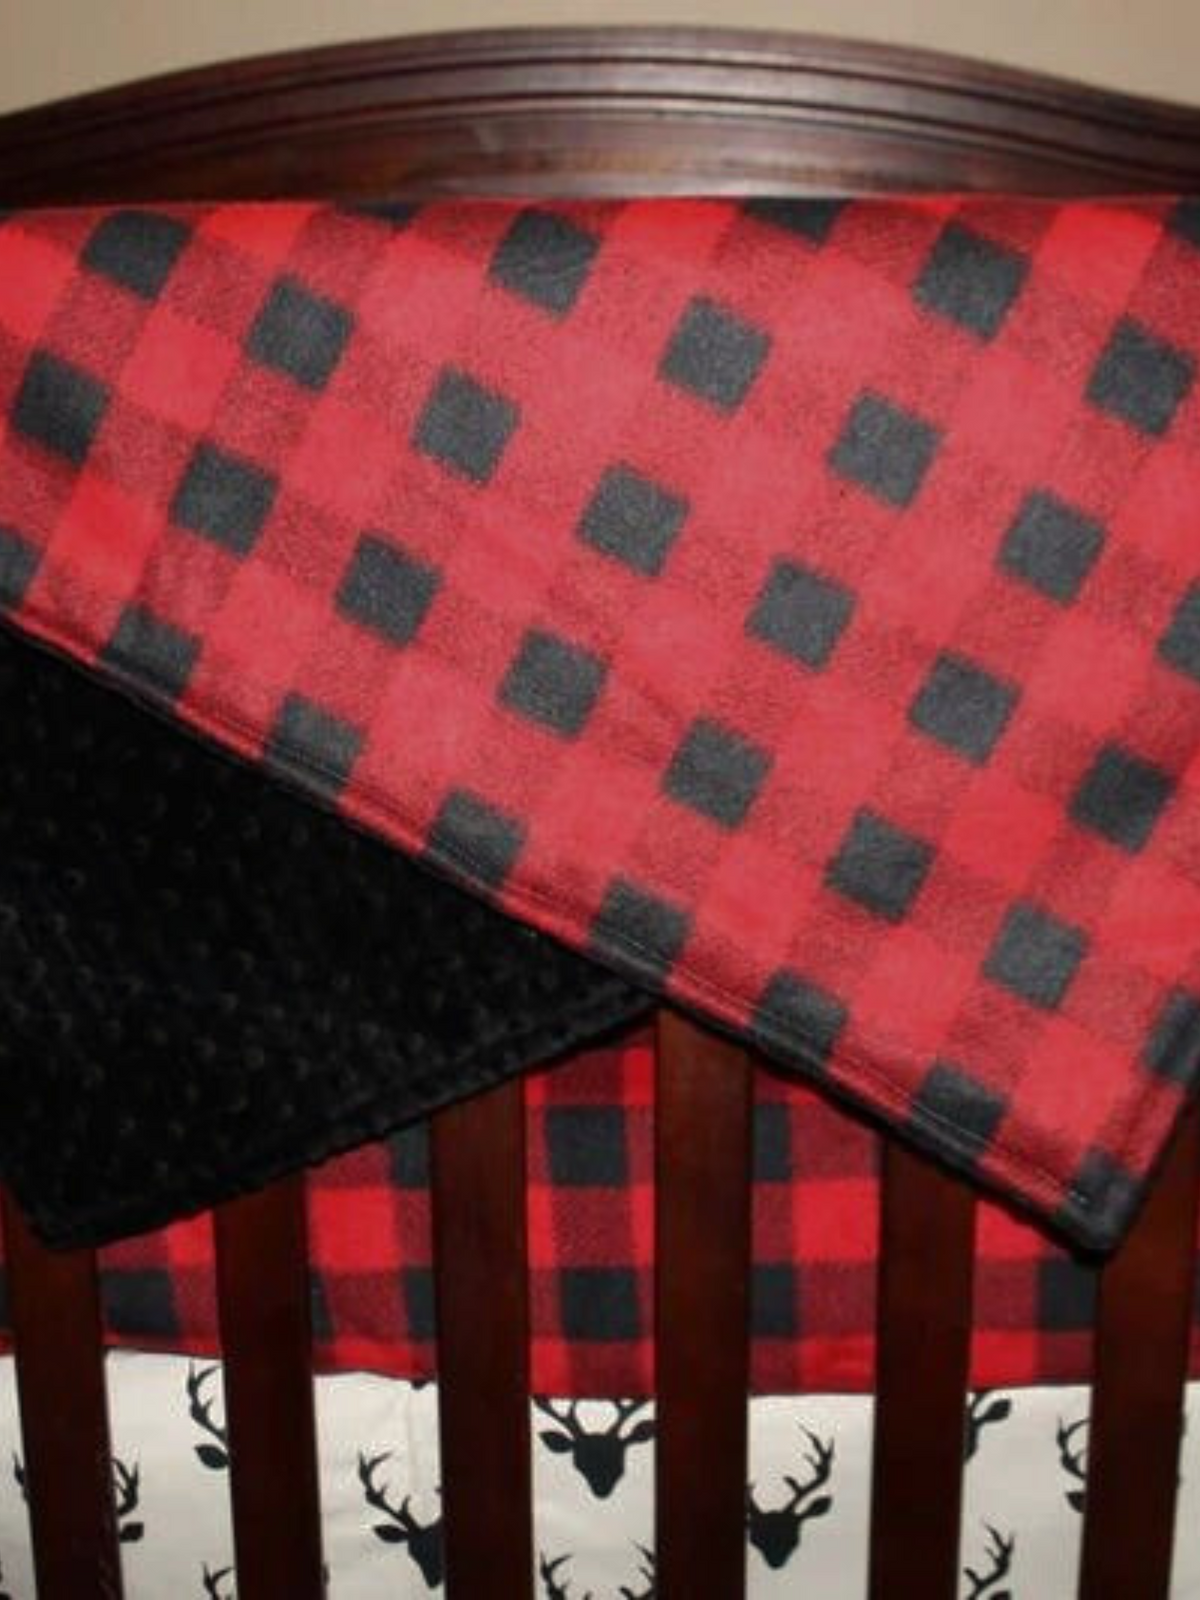 Standard Blanket-Mountain Lodge Red Black Buffalo Check and Black Minky Woodland Blanket - DBC Baby Bedding Co 